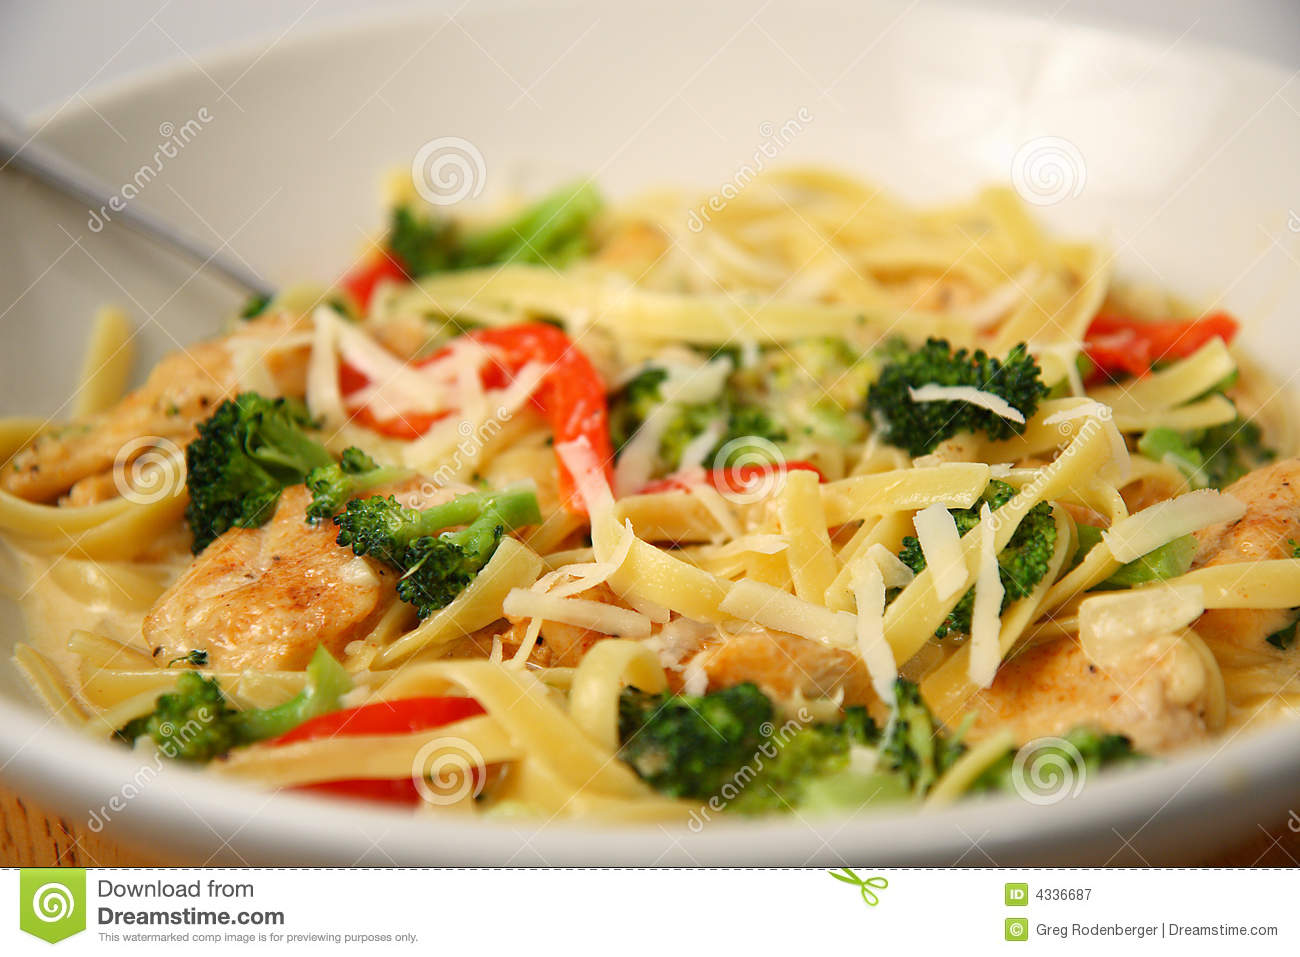 Fettuccine Alfredo With Chicken Broccoli And Red Peppers